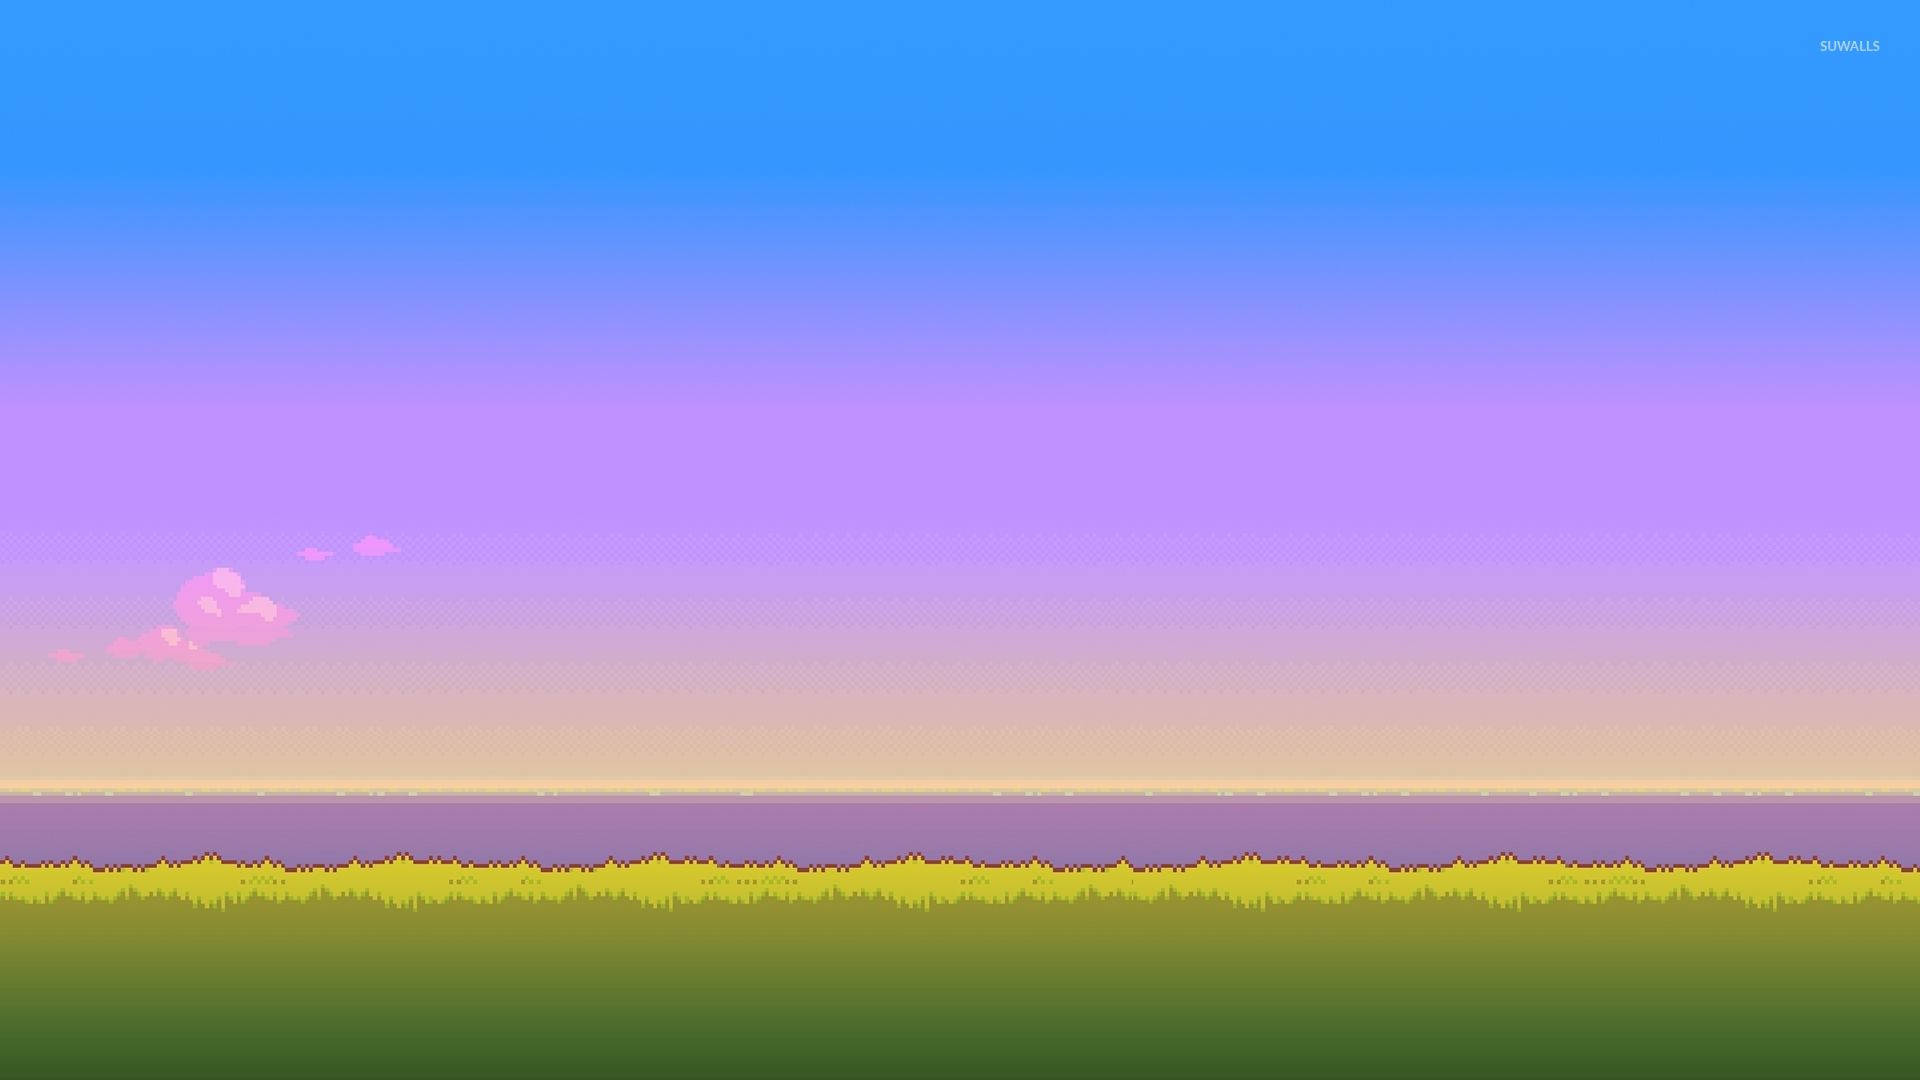 8 Bit 1920X1080 Wallpaper and Background Image